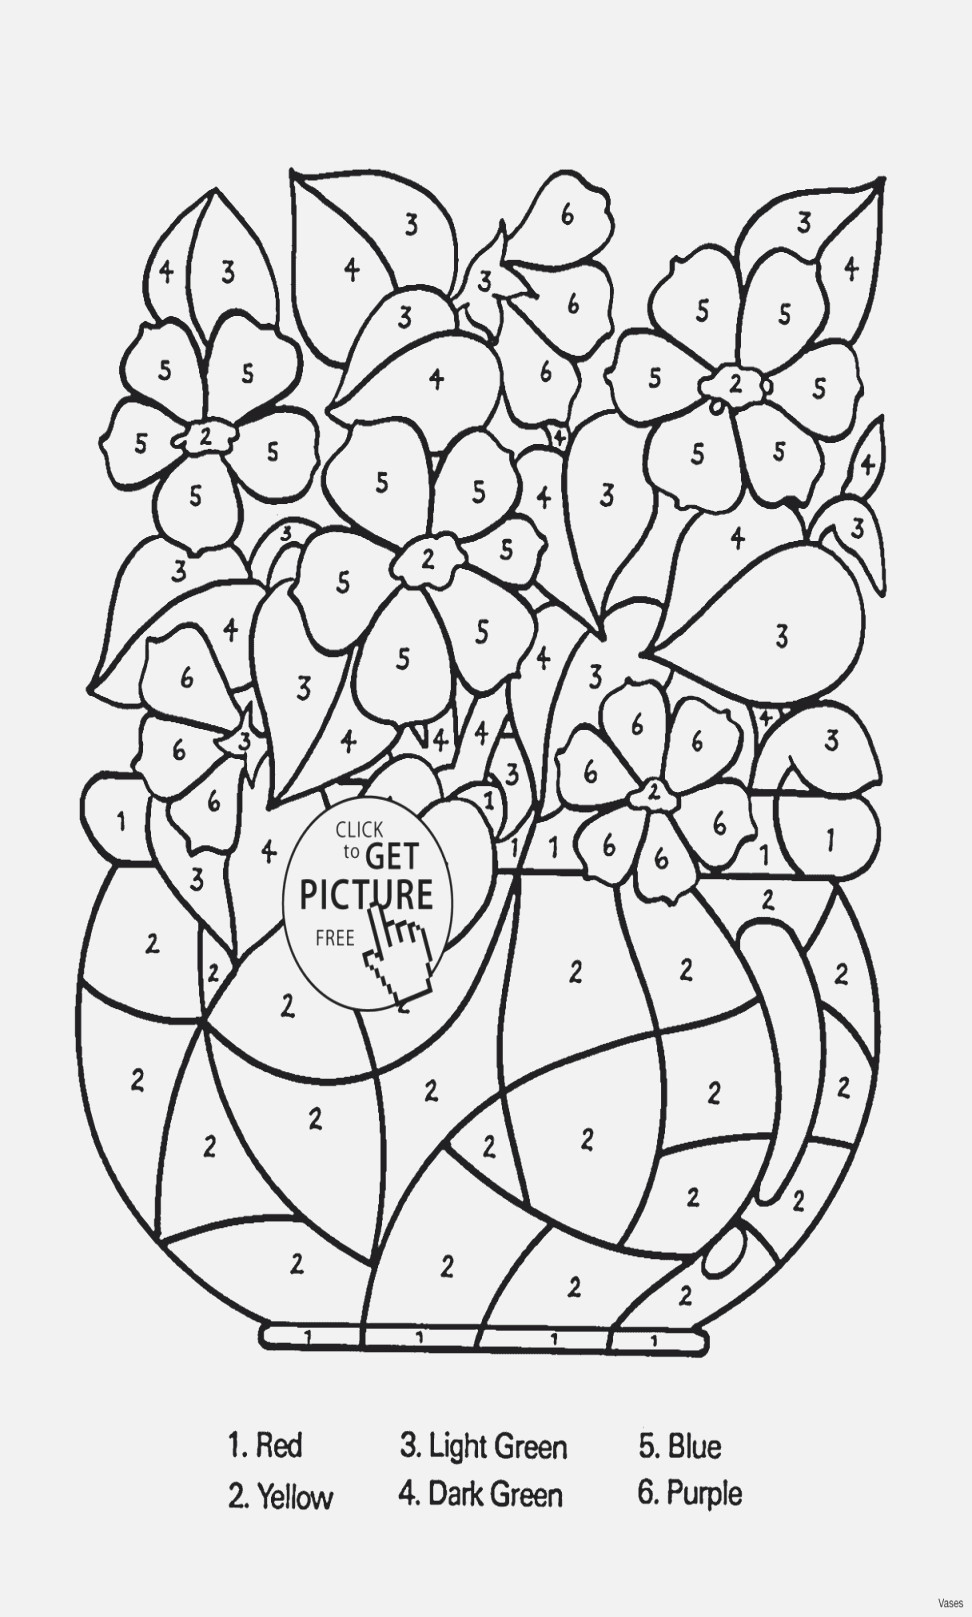 light blue vase of easy coloring pictures vases flower vase coloring page pages flowers in easy coloring pictures vases flower vase coloring page pages flowers in a top i 0d and free